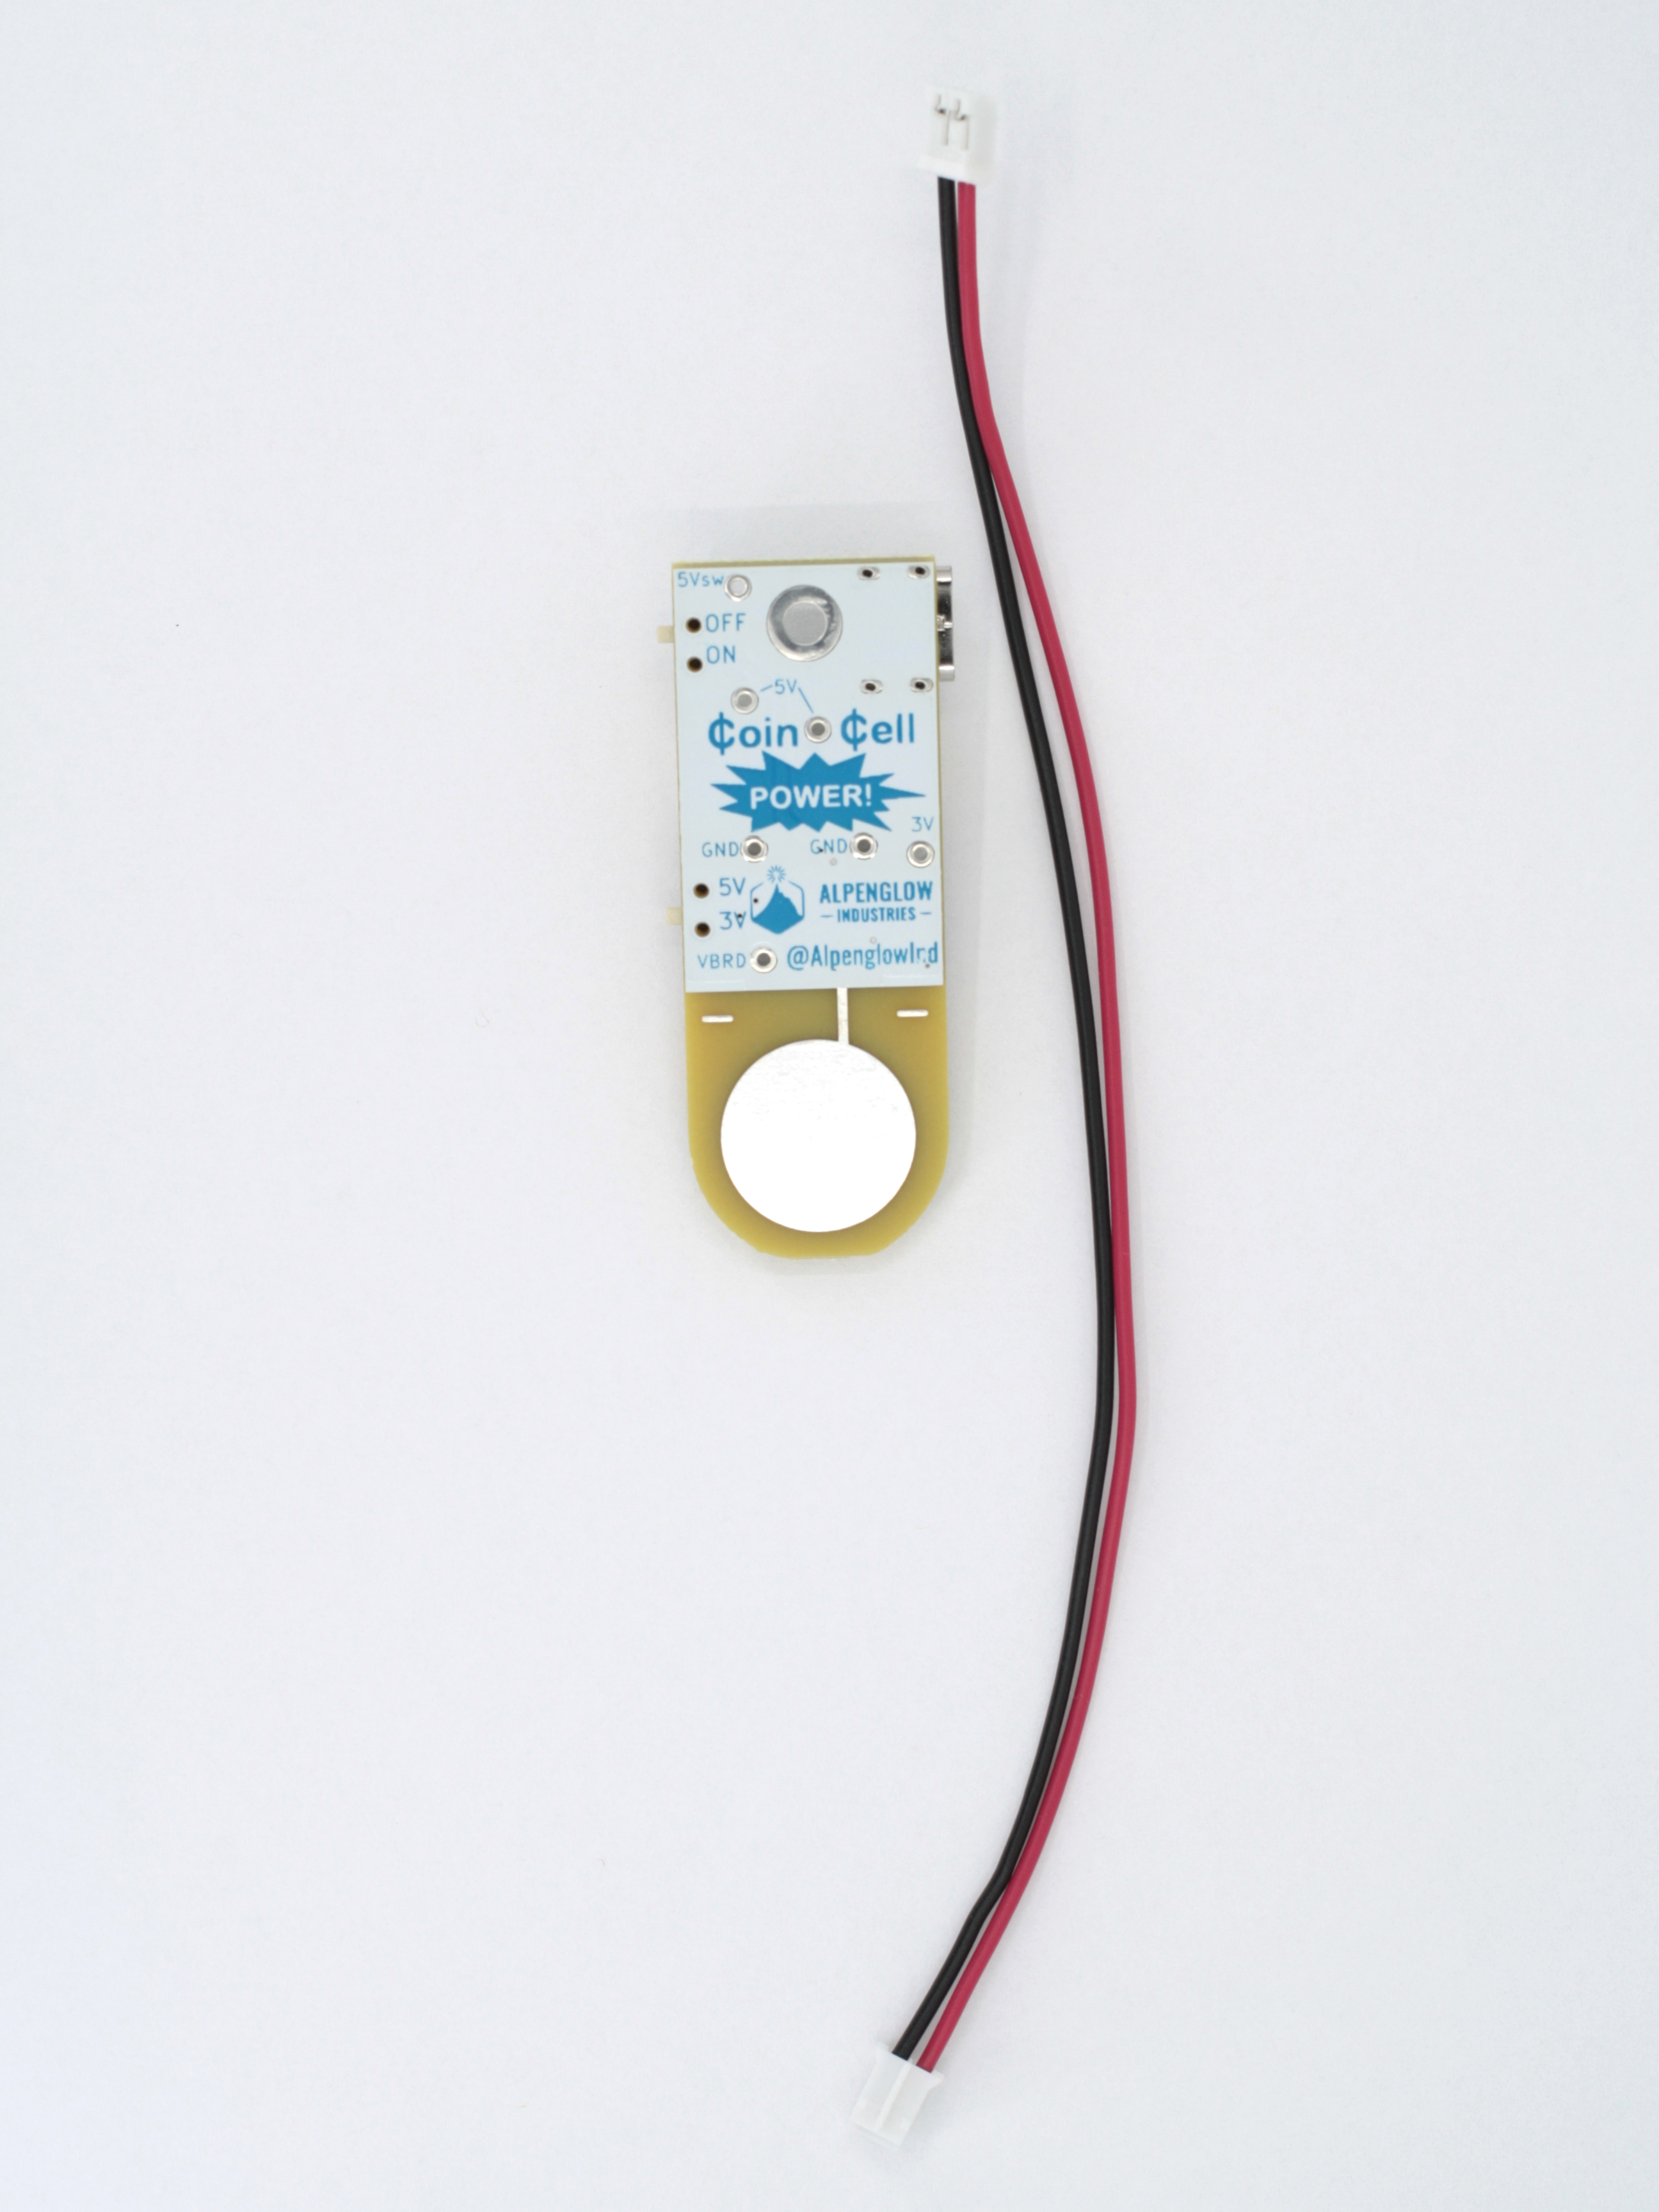 Coin Cell Power Board